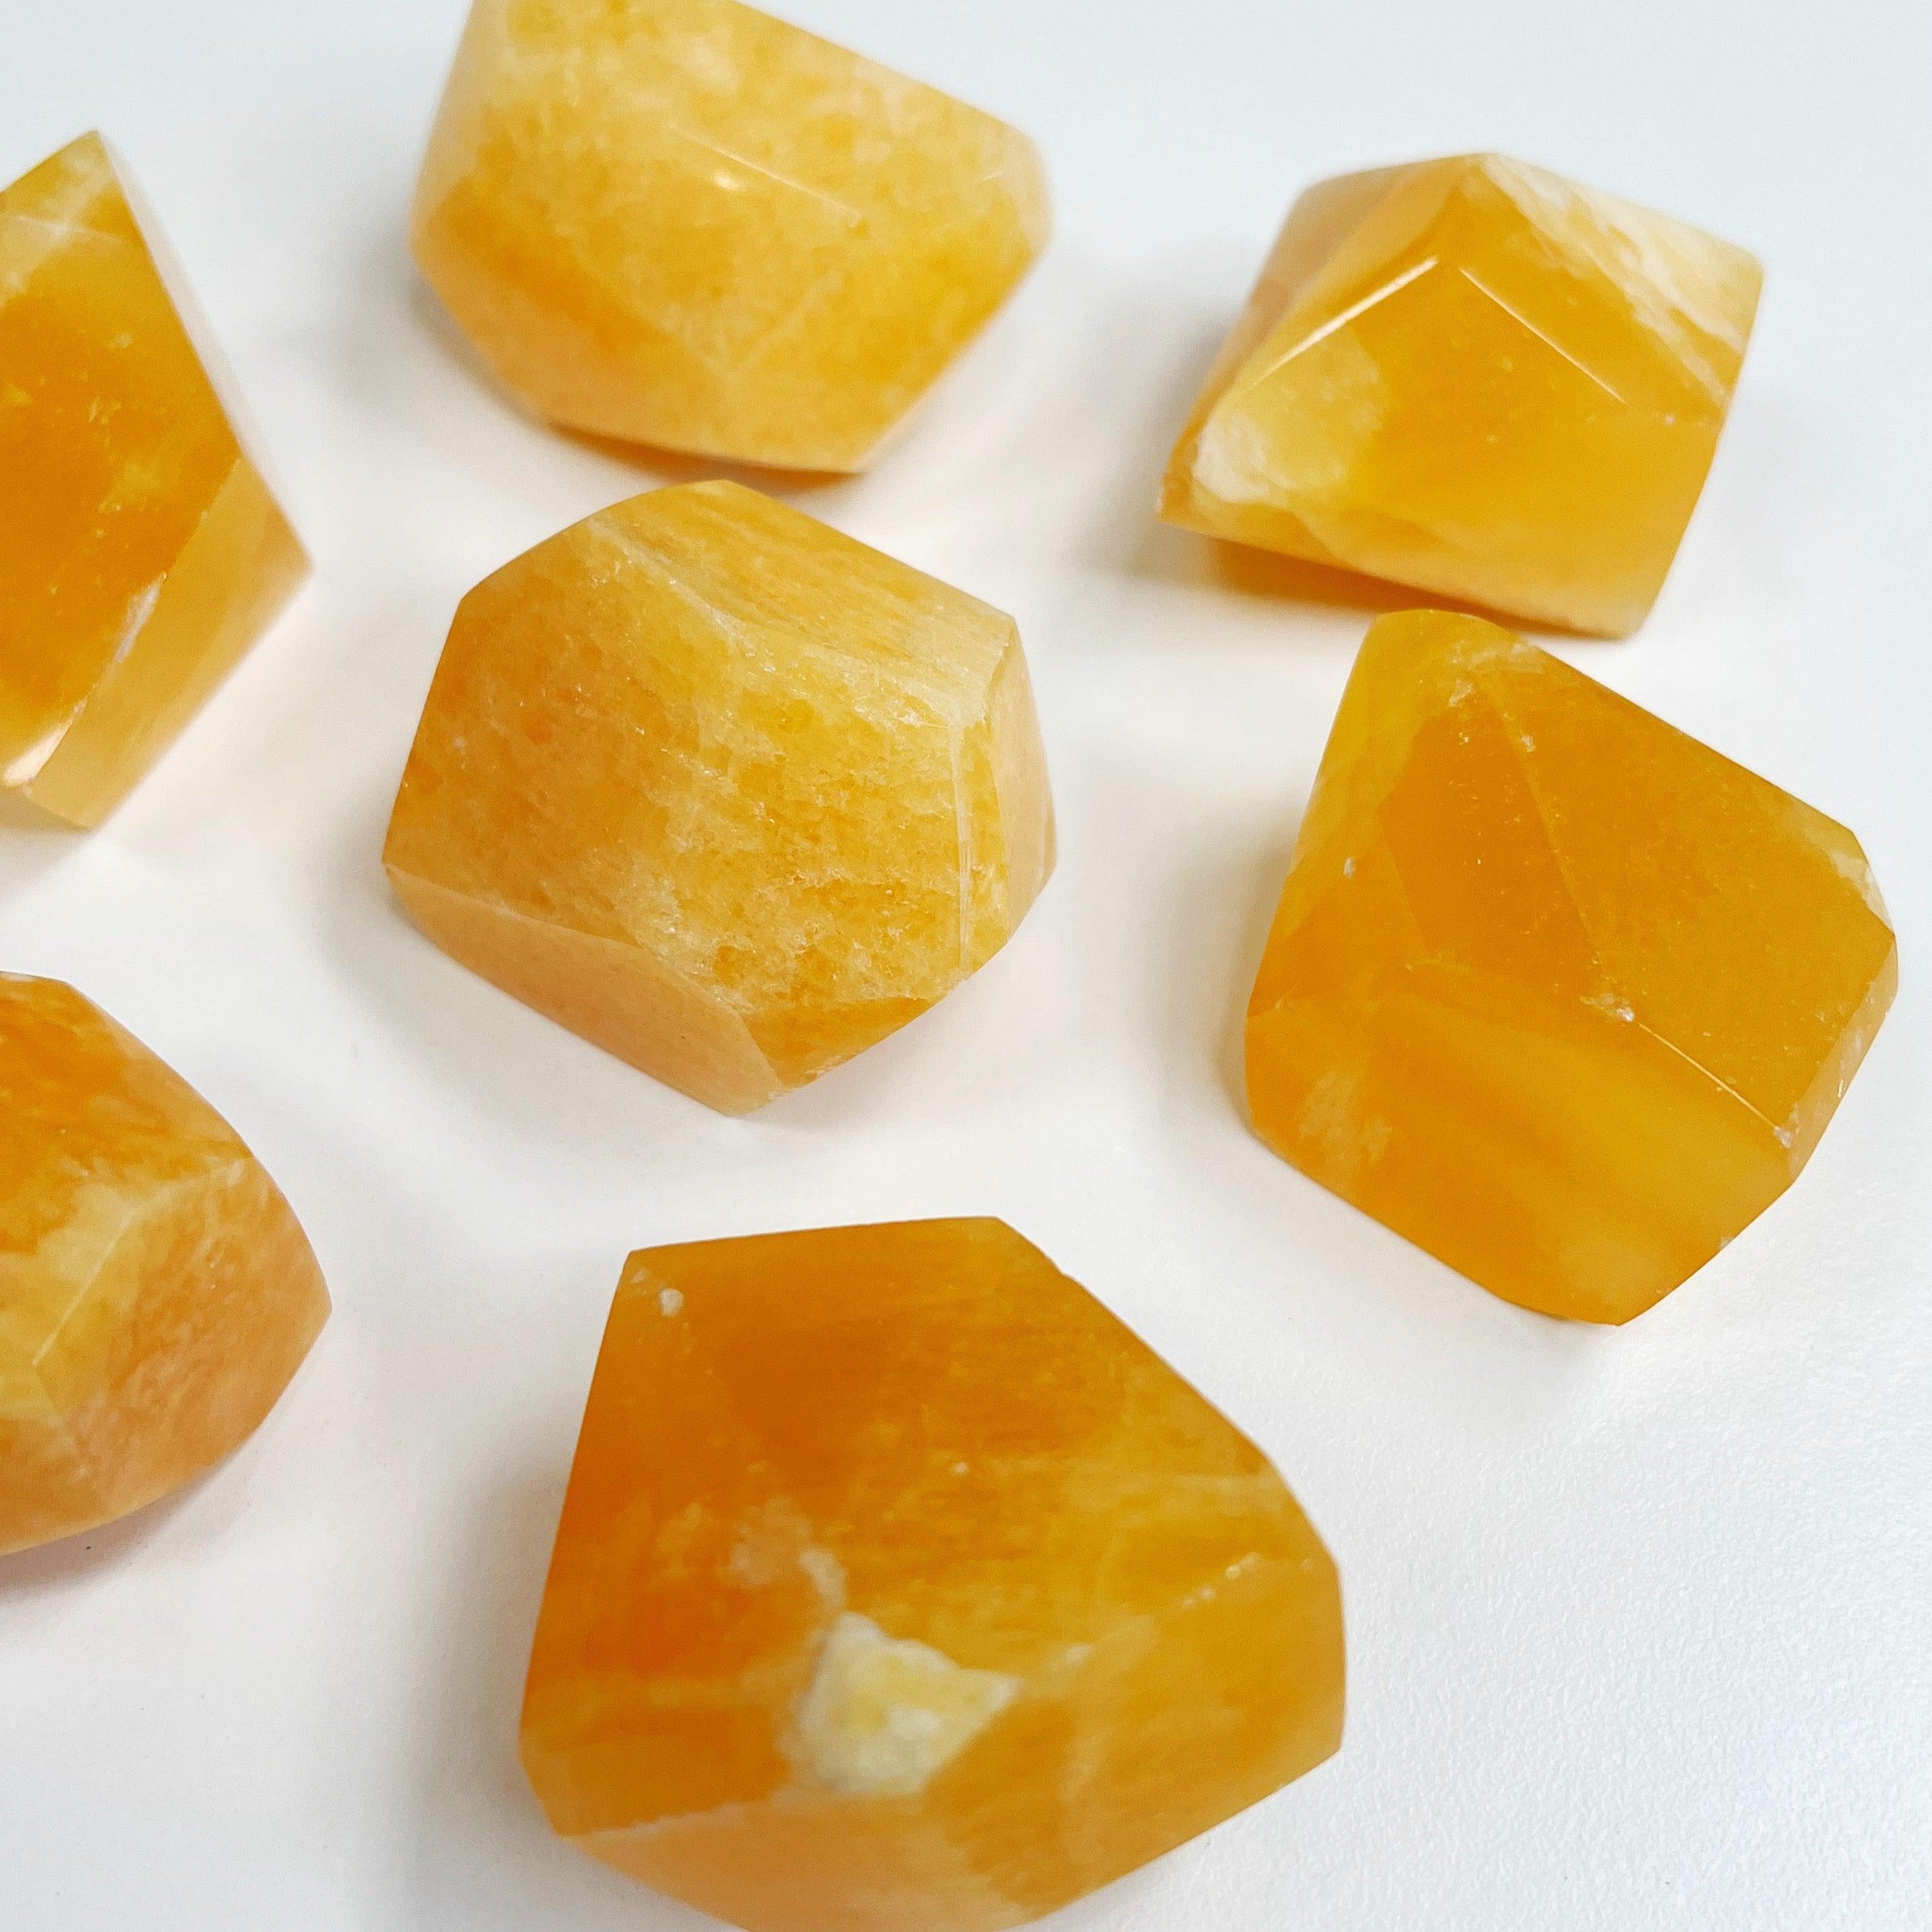 ORANGE CALCITE "GEM" SHAPE - 33 bday, calcite, holiday sale, new year new crystals, orange calcite, polished stone, recently added - The Mineral Maven